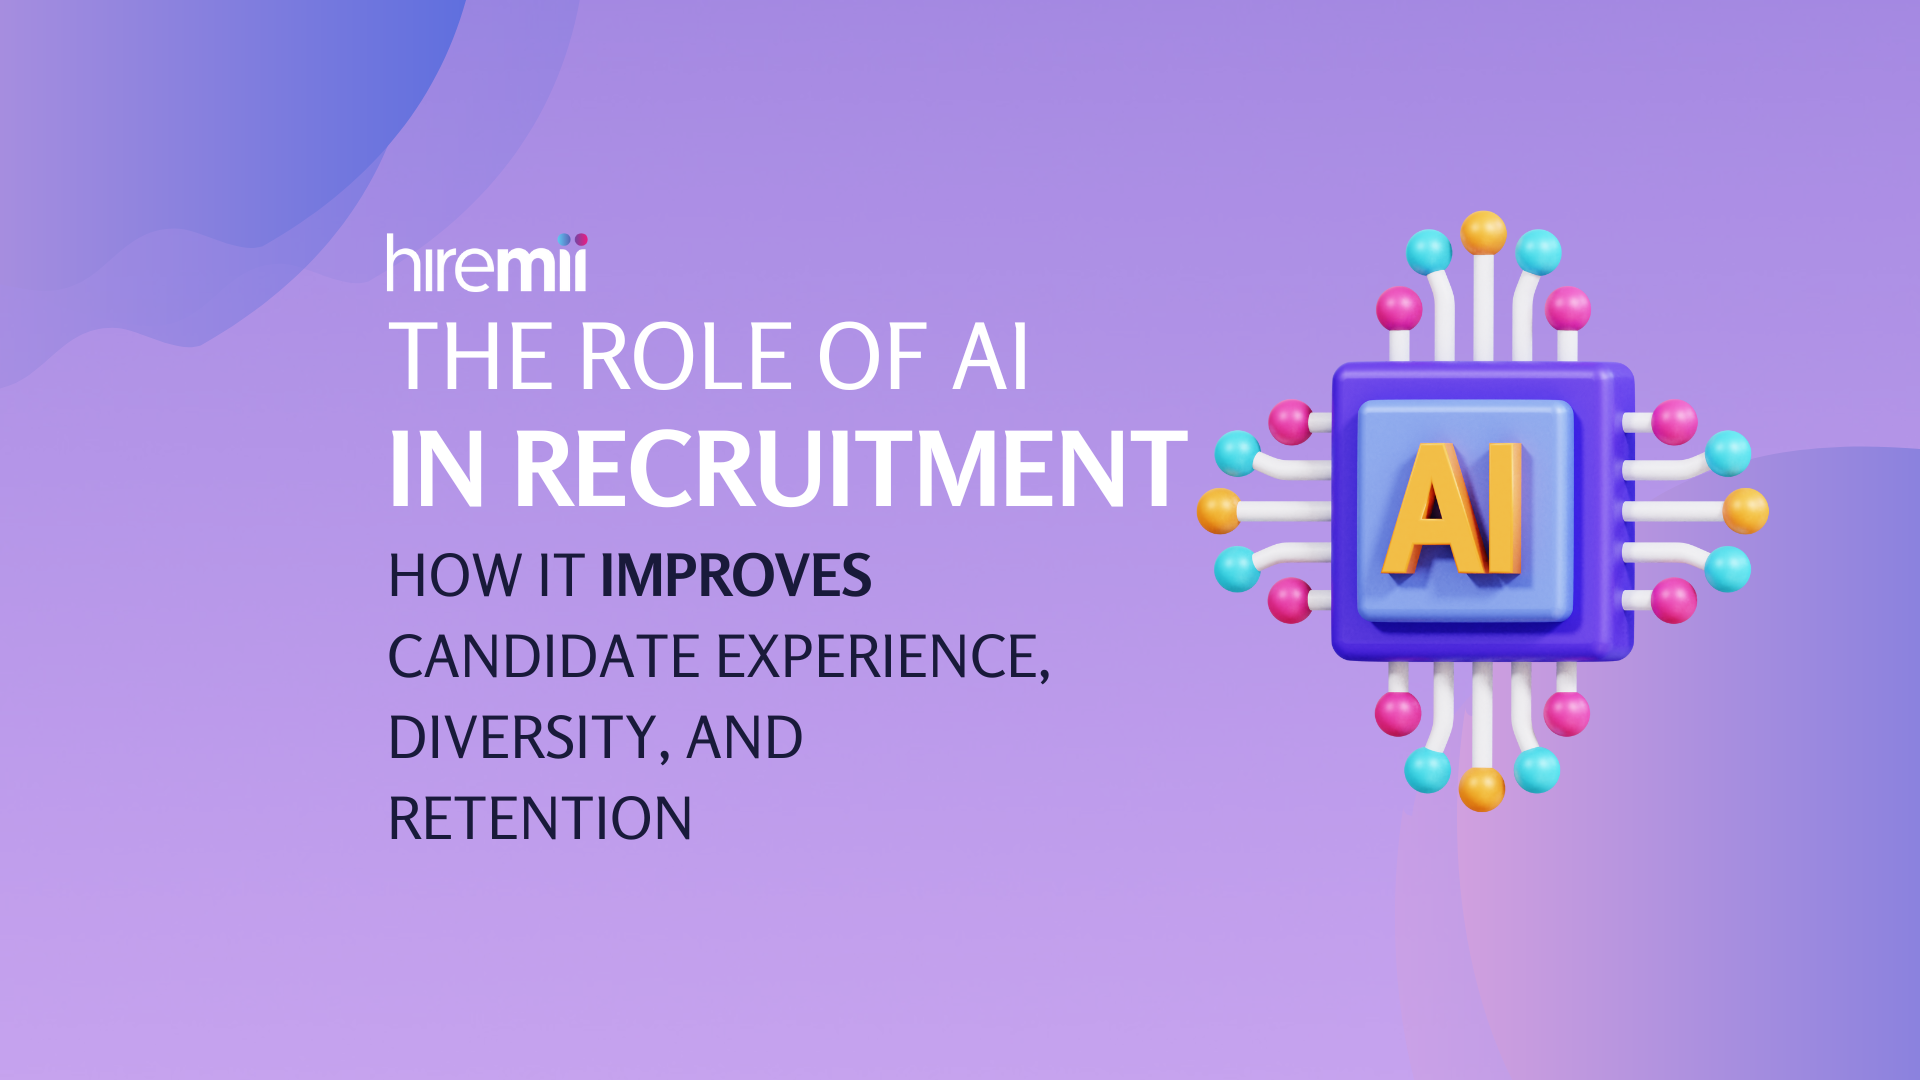 The role of AI in Recruitment image